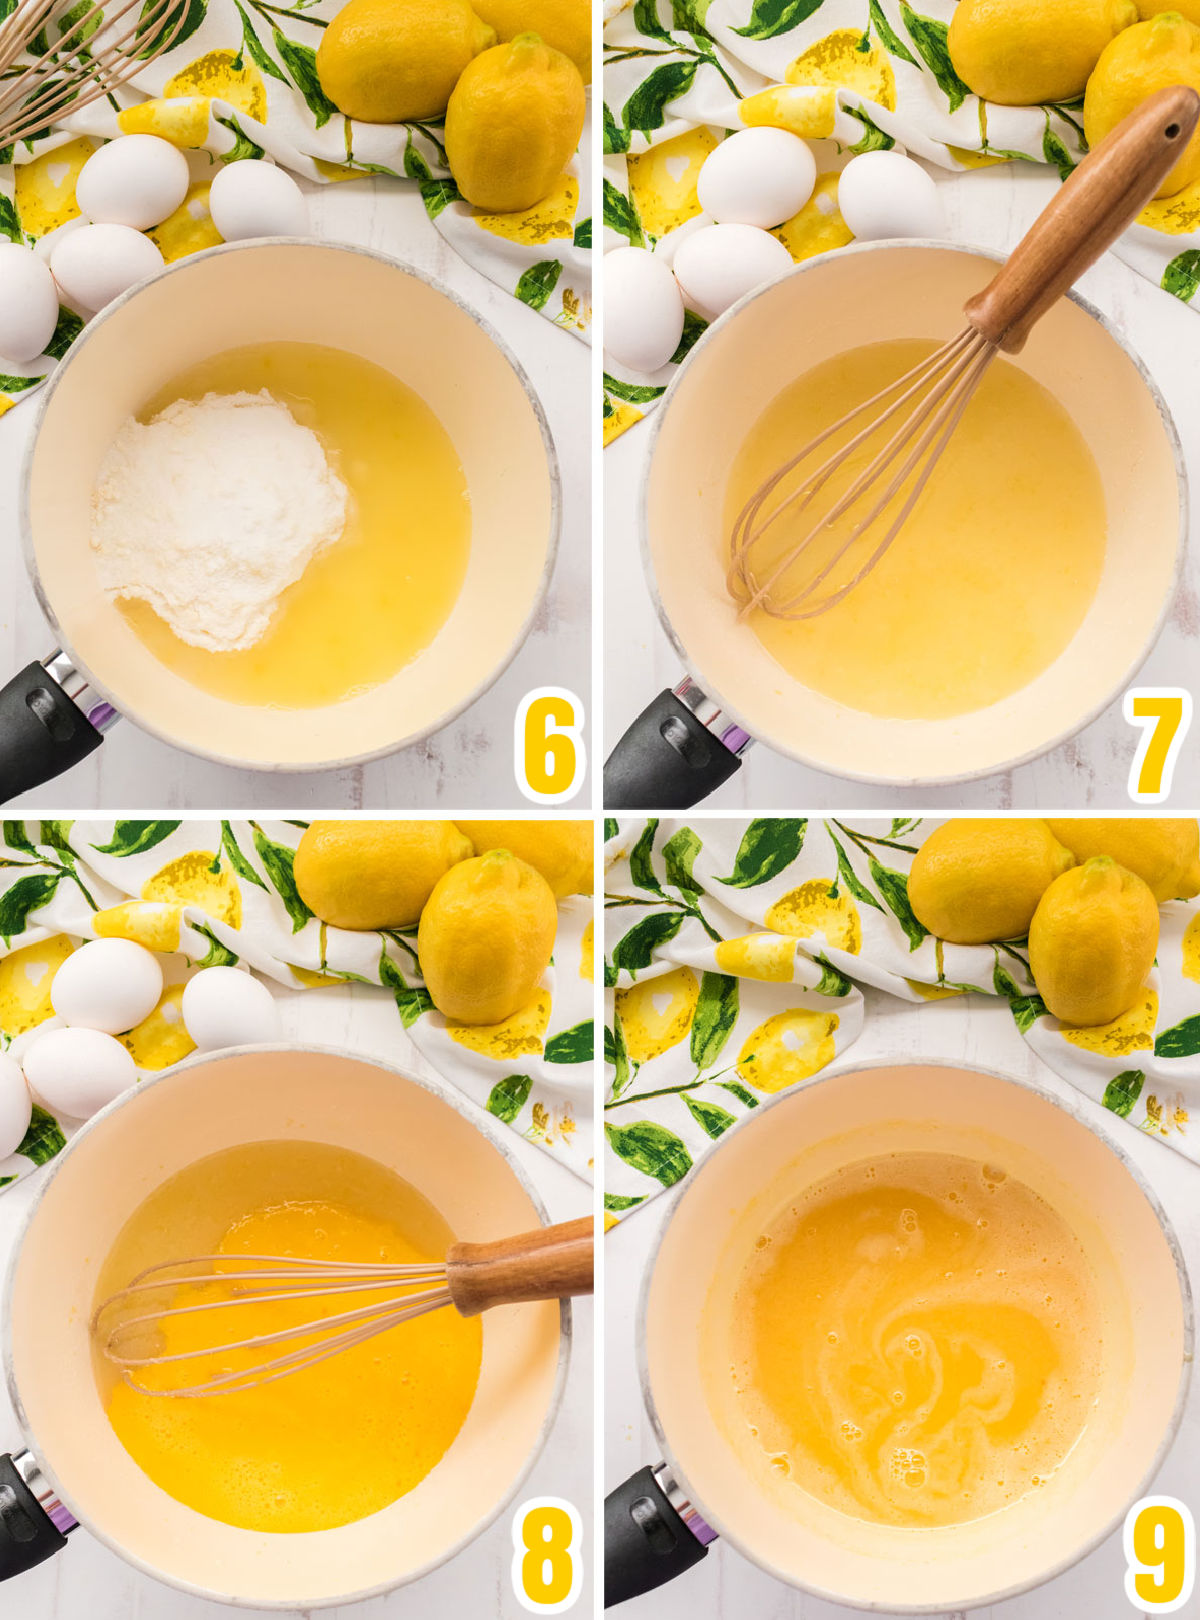 Collage image showing how to mix the lemon juice, sugar and eggs to create the lemon curd mixture.